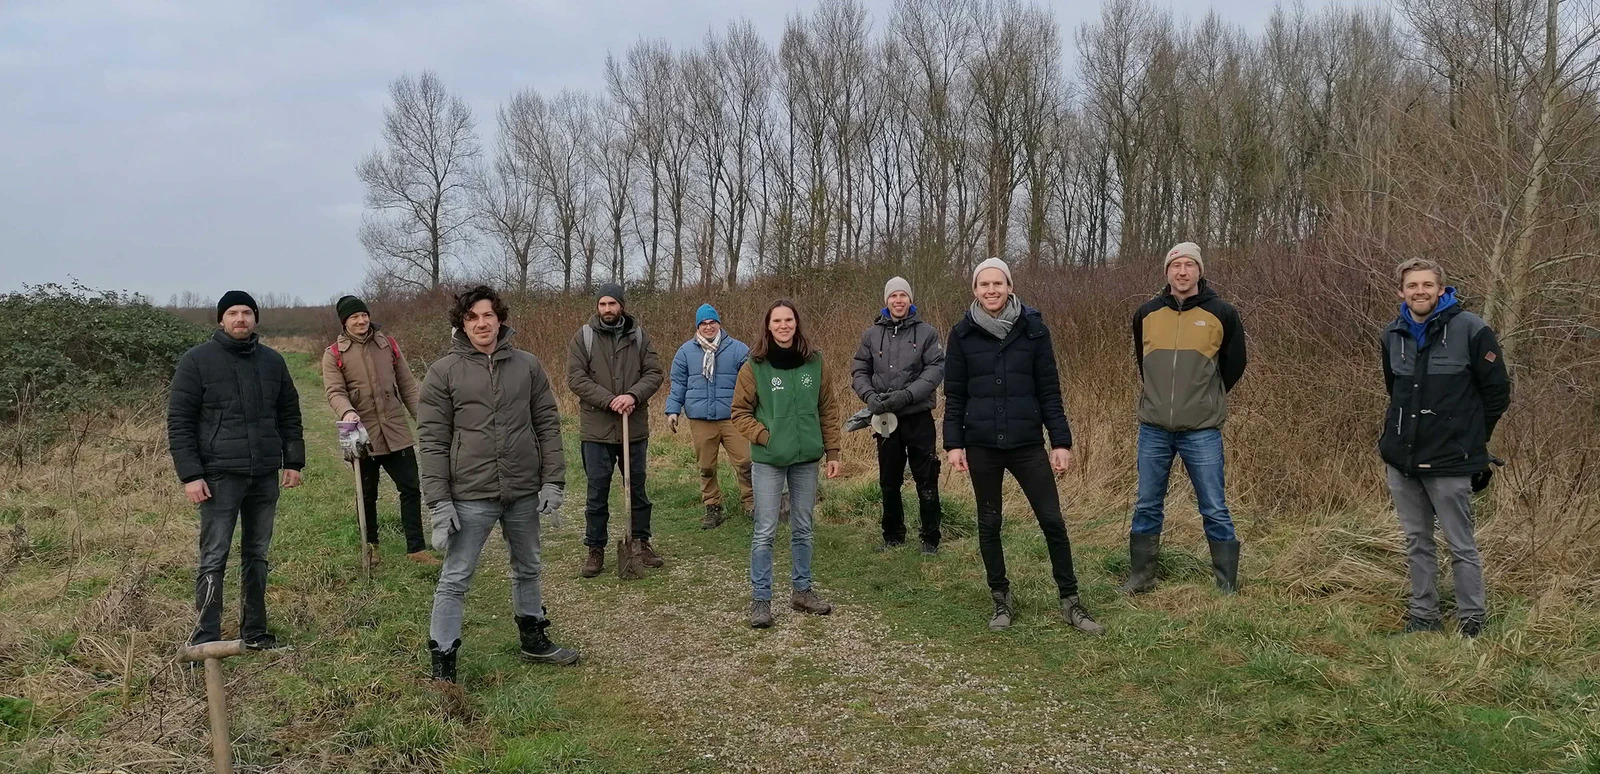 This week we kicked off our 2022 plantings in the Netherlands, in this case in a food forest close to Amsterdam. It was a pleasure to work with our platform builders De Voorhoede, planting a variety of edible trees and shrubs. It was also a good occasion to check and plan further improvements to our Tag your Tree functionality. Looking forward to this new year 2022 together!